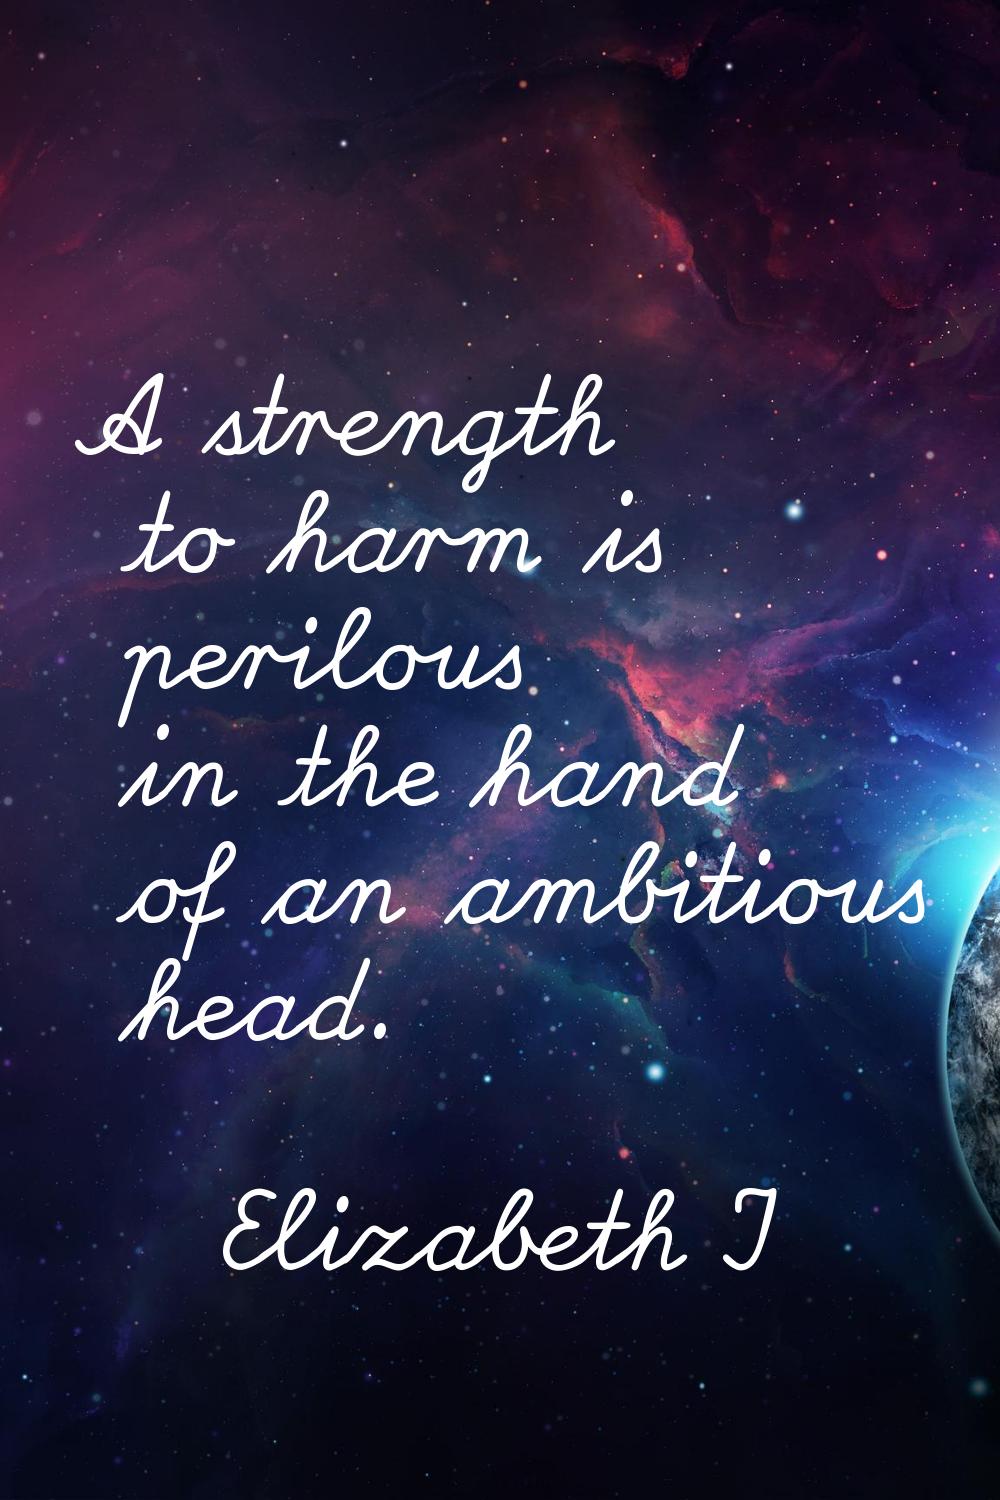 A strength to harm is perilous in the hand of an ambitious head.